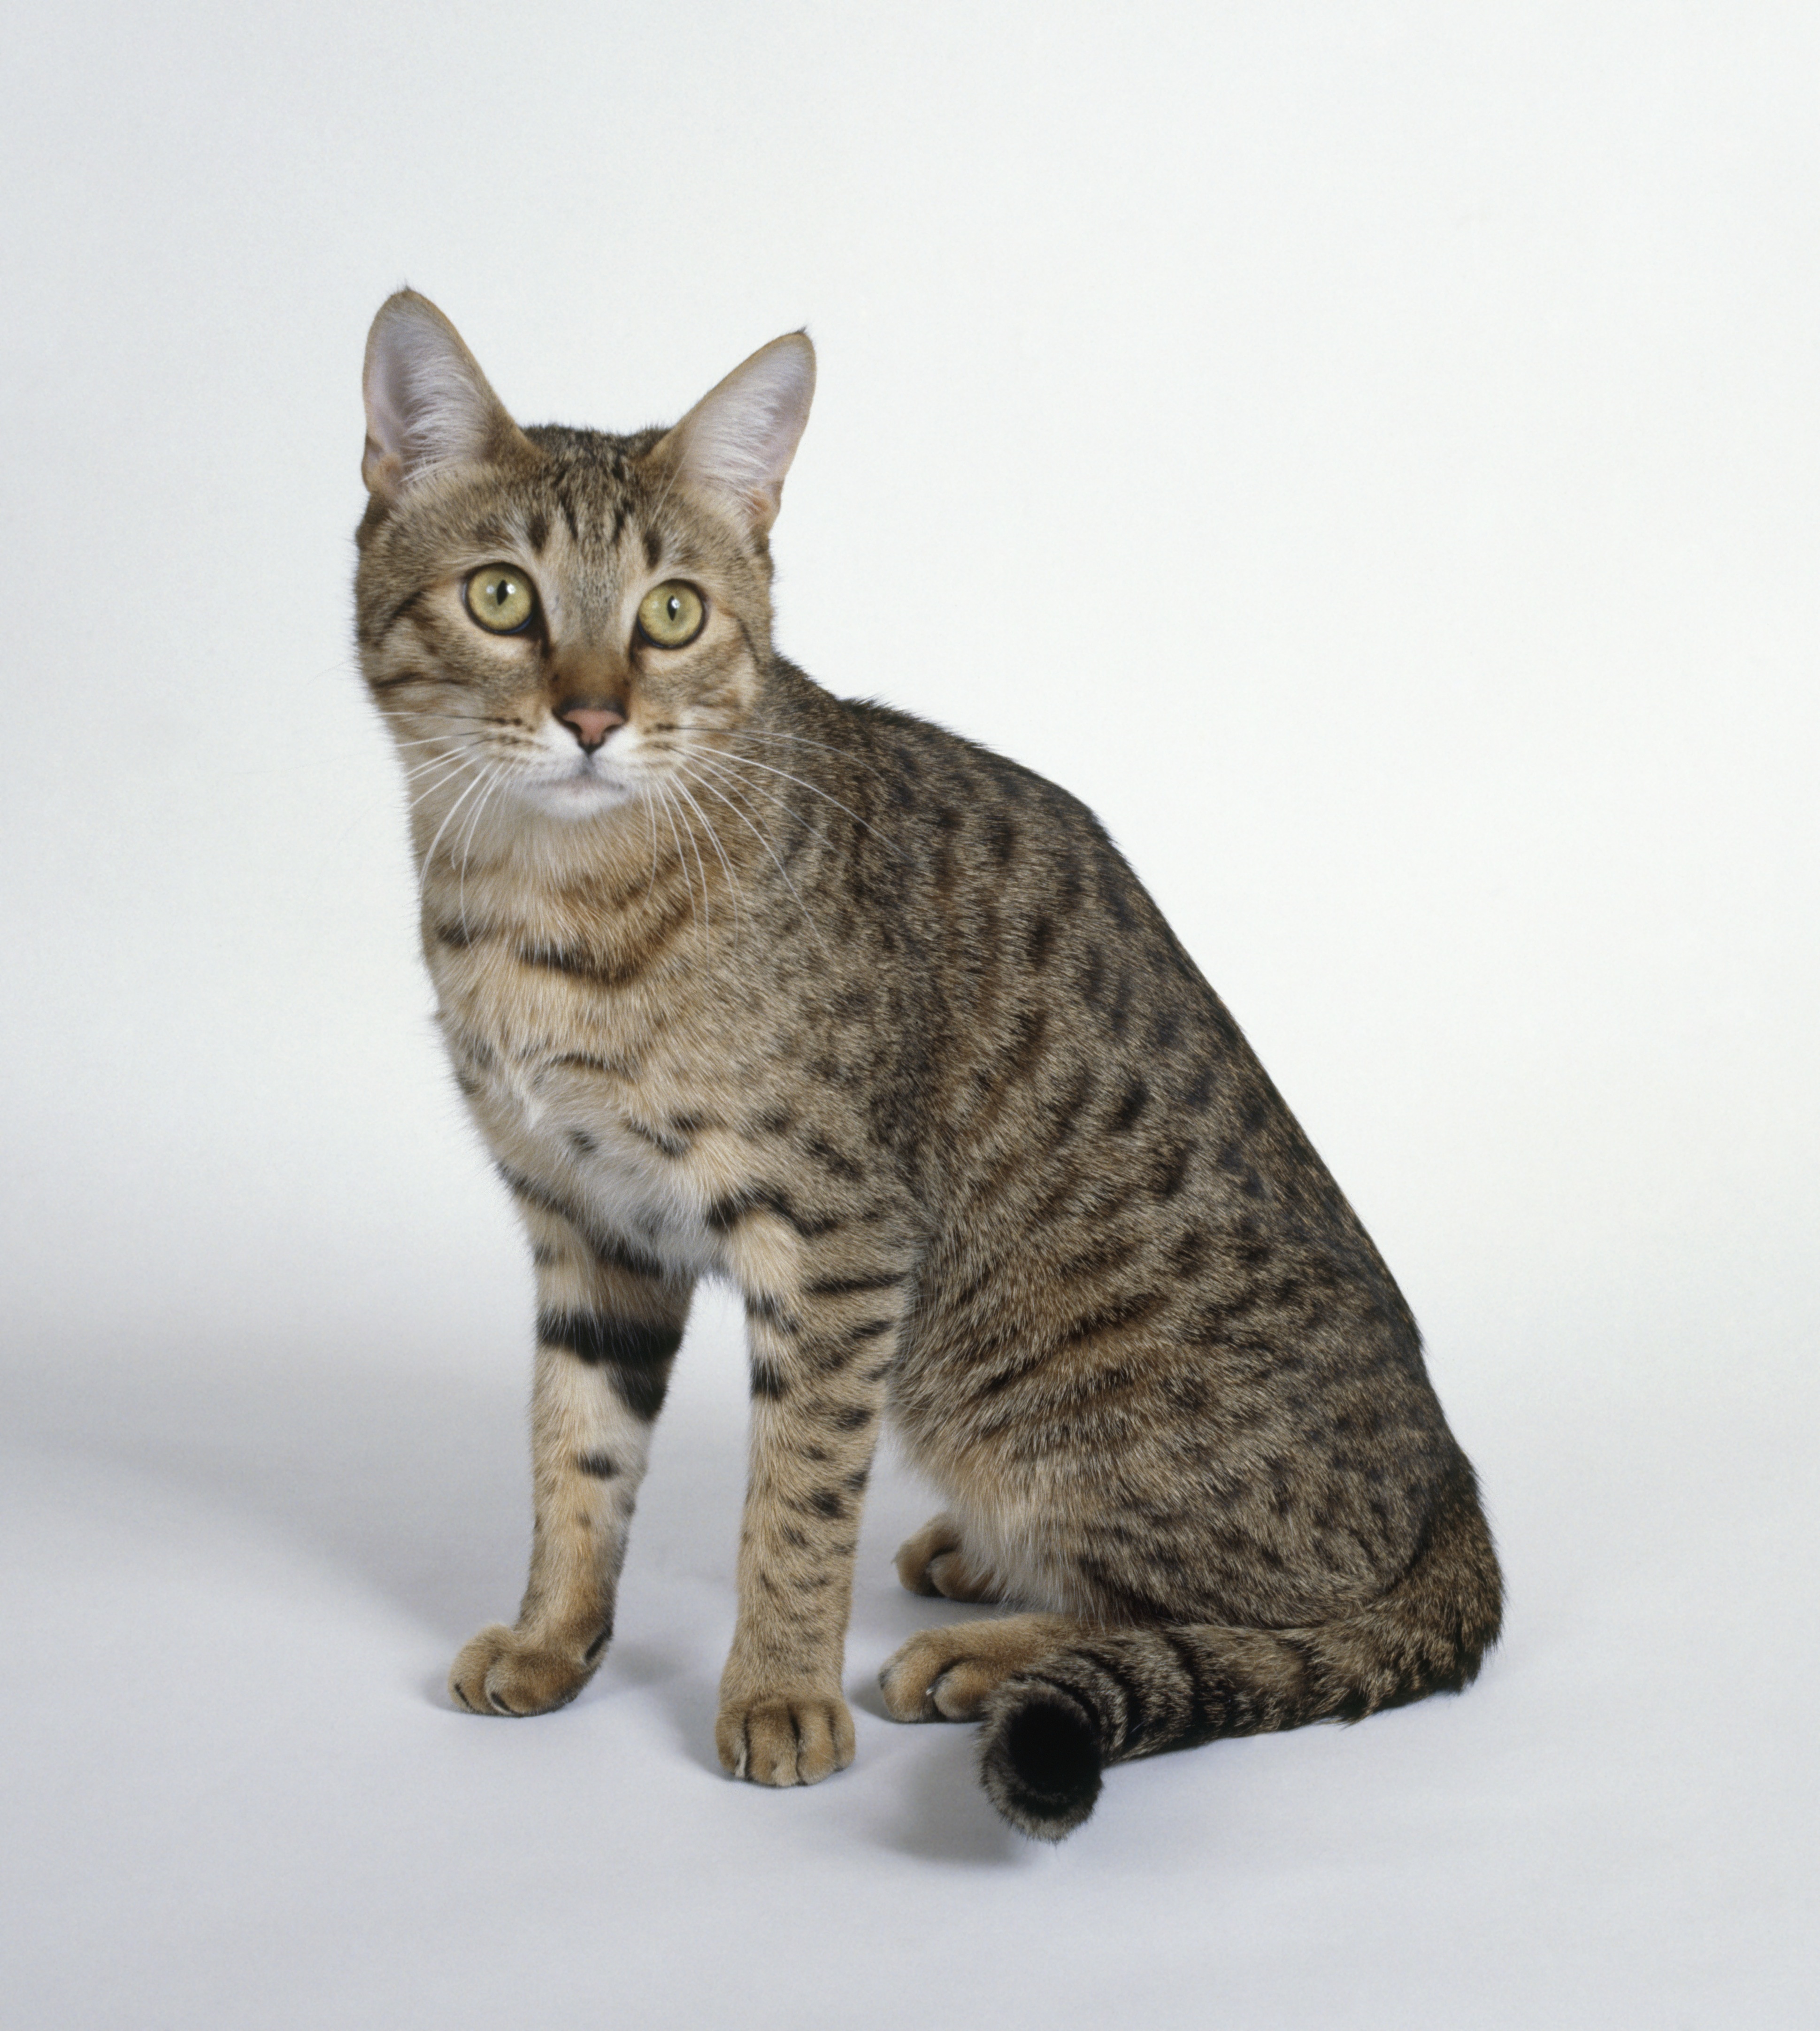 California Spangled Mixed Cat Breed Pictures